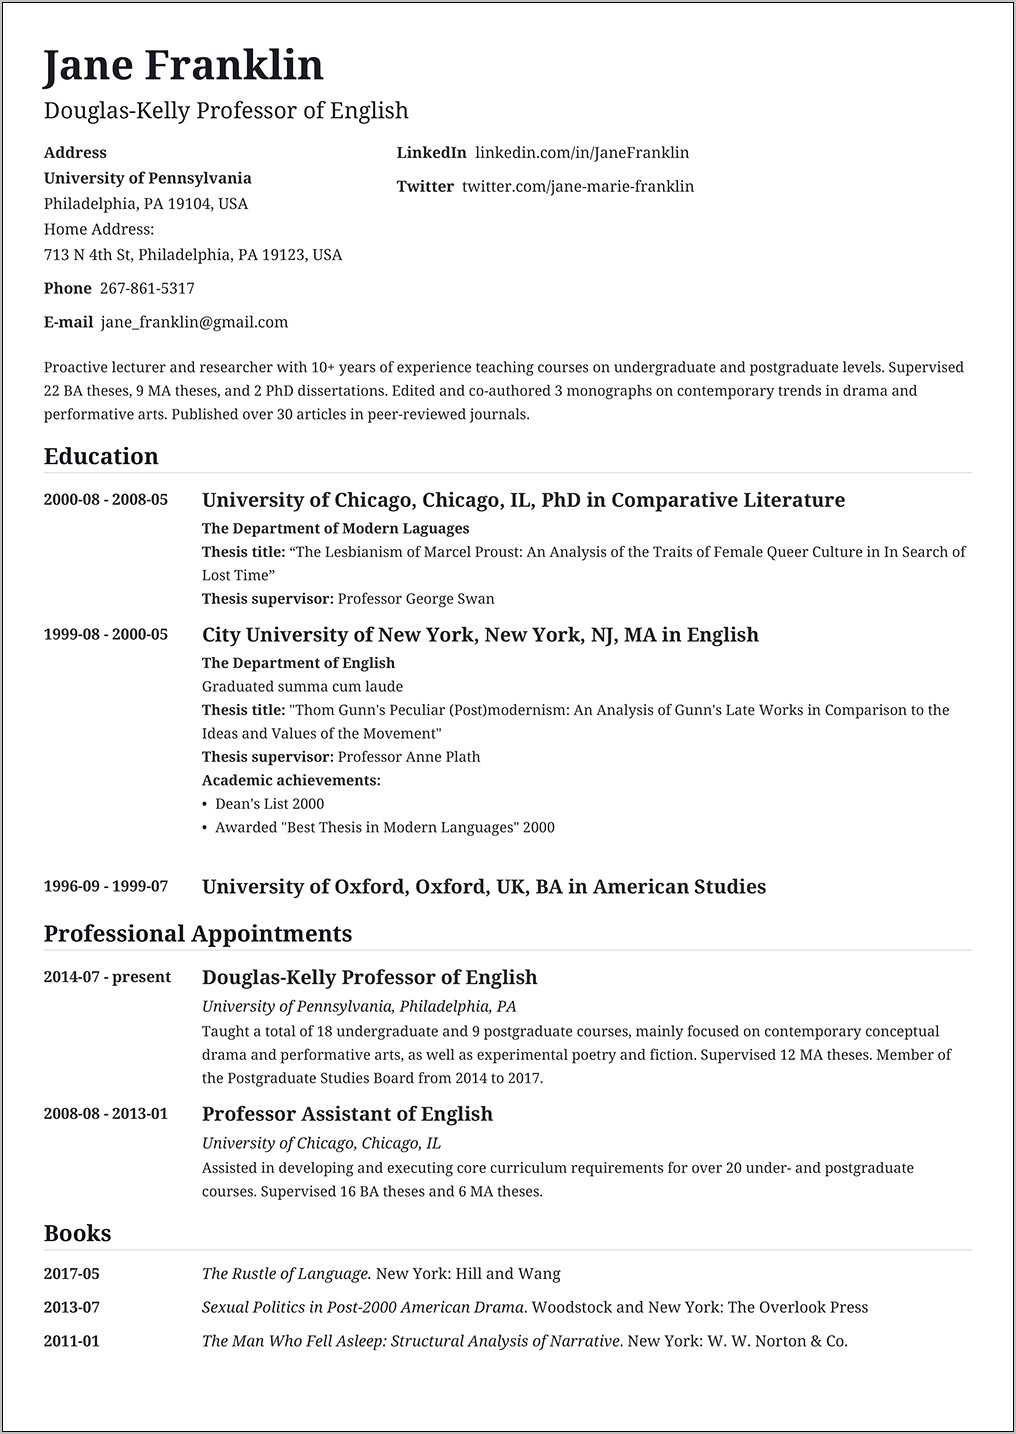 Best Professional Resumes That Were Hired